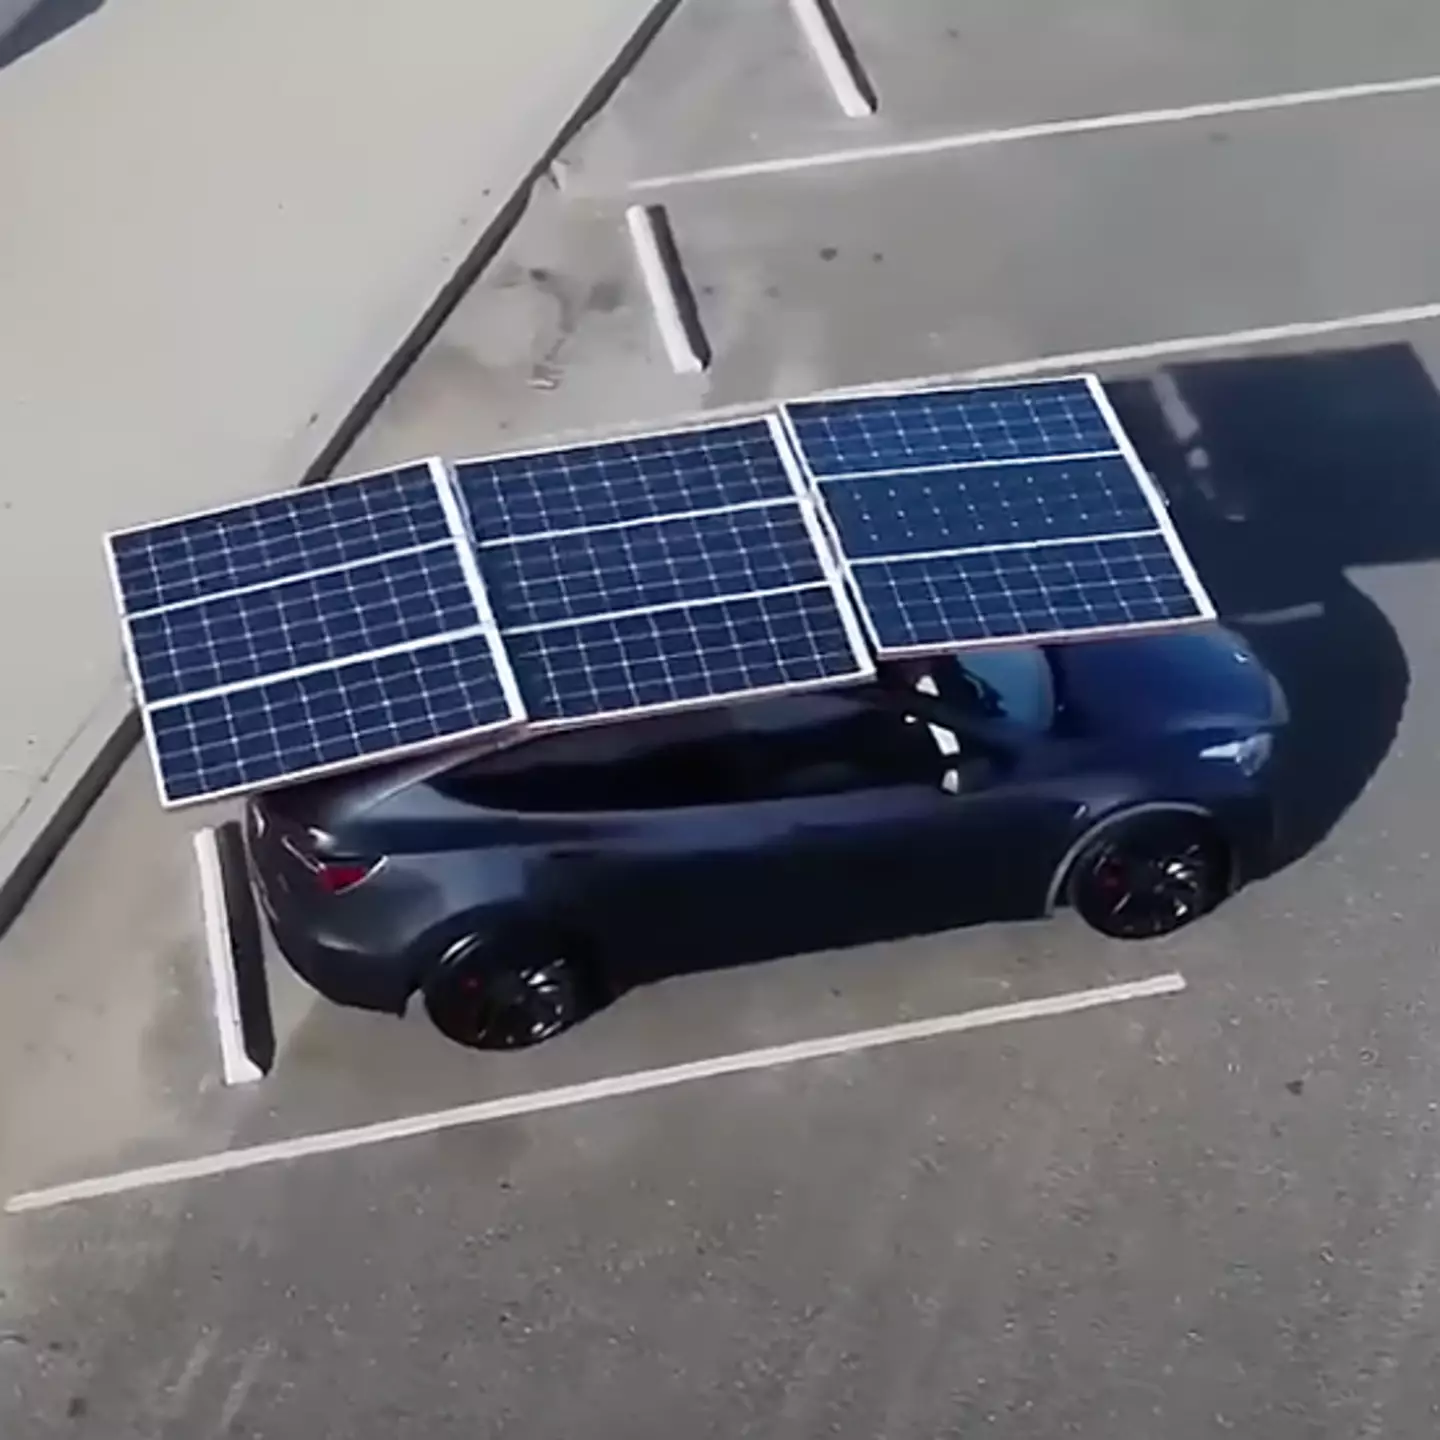 Tesla owner adds 4000 watt solar panel roof to his Model Y car after company wouldn't